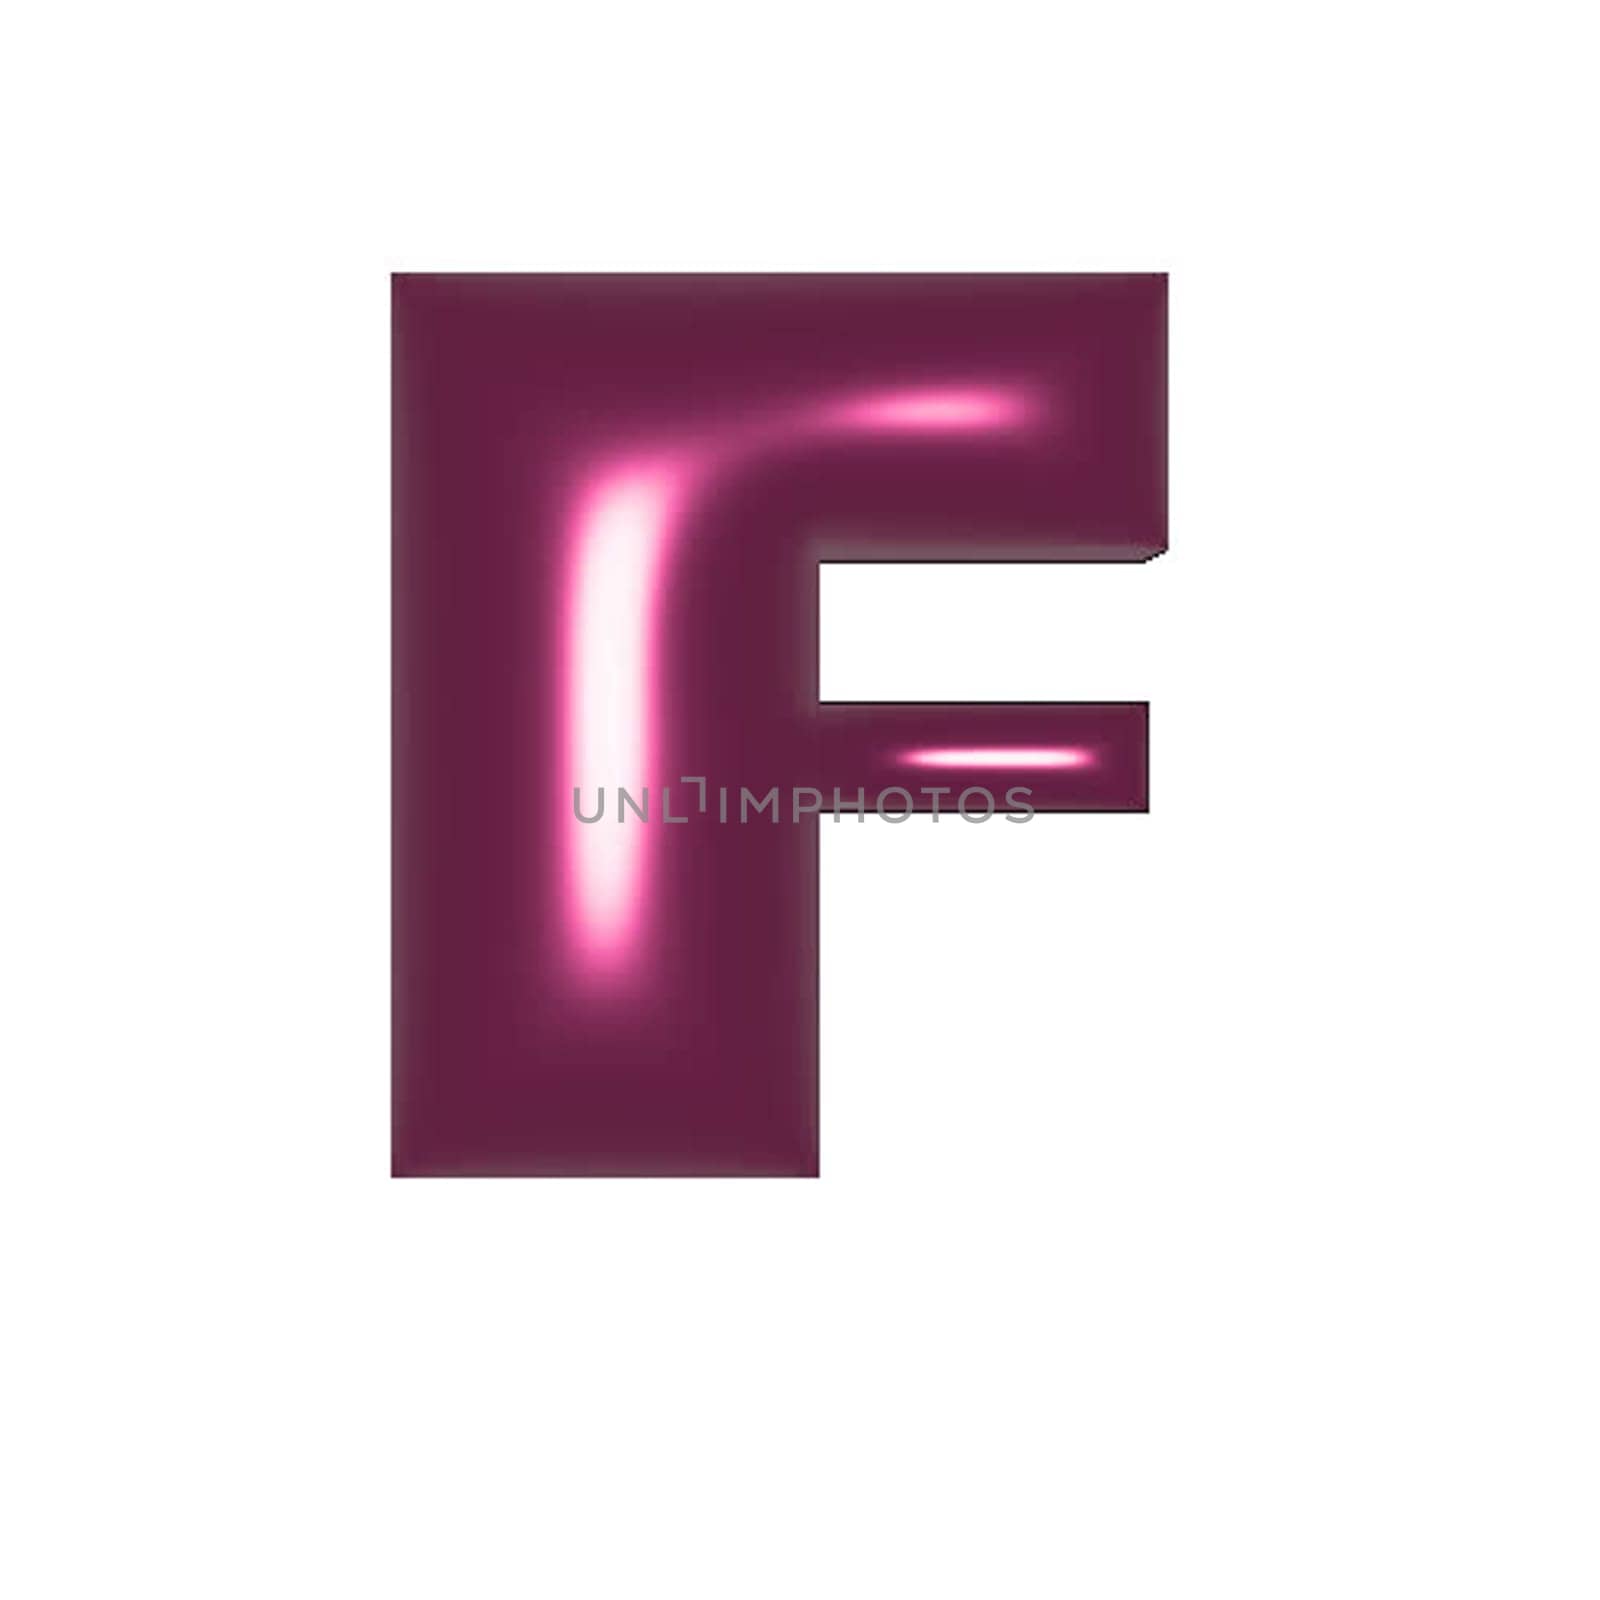 Red metal shiny reflective letter F 3D illustration by Dustick